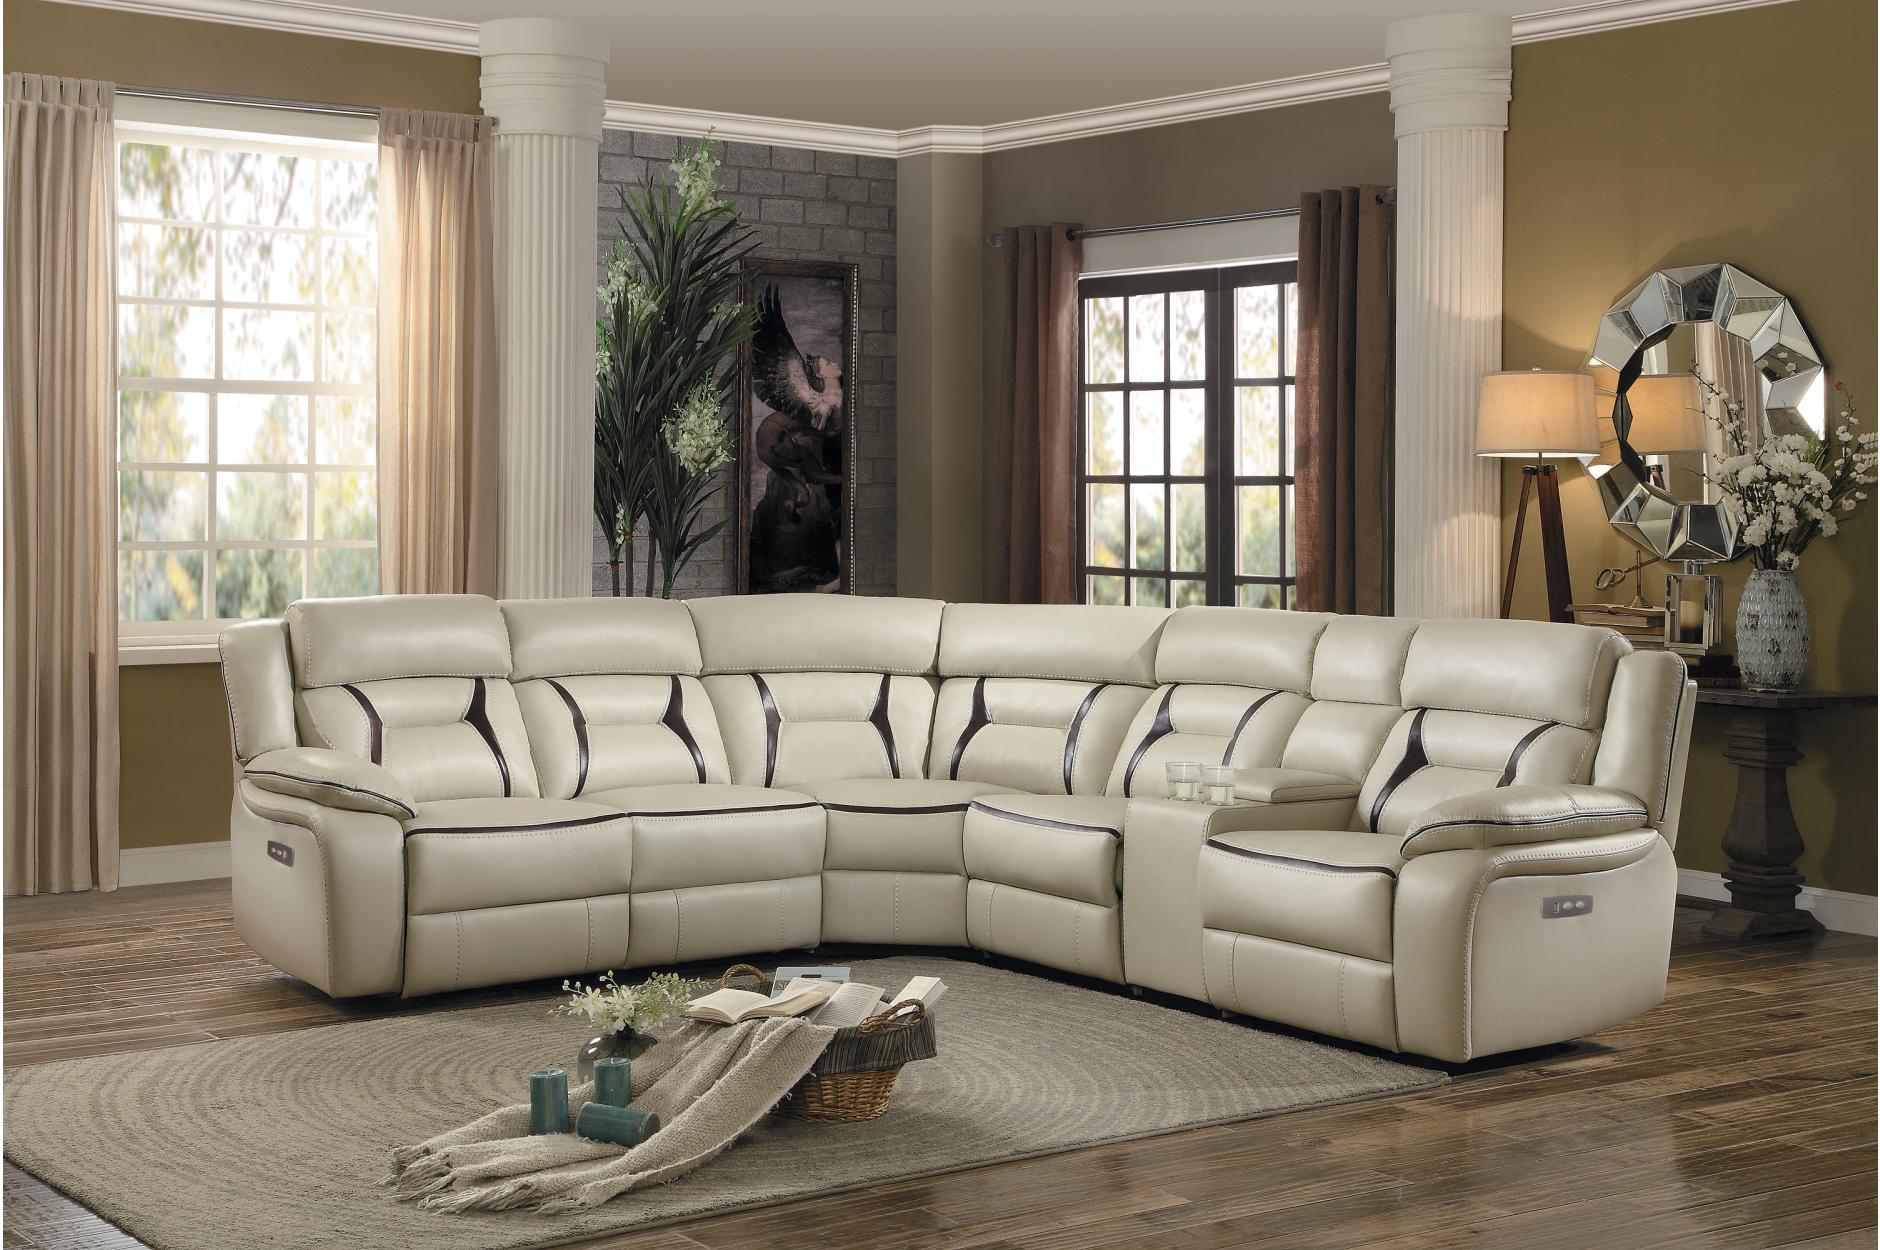 Homelegance® Amite 6 Piece Sectional Set